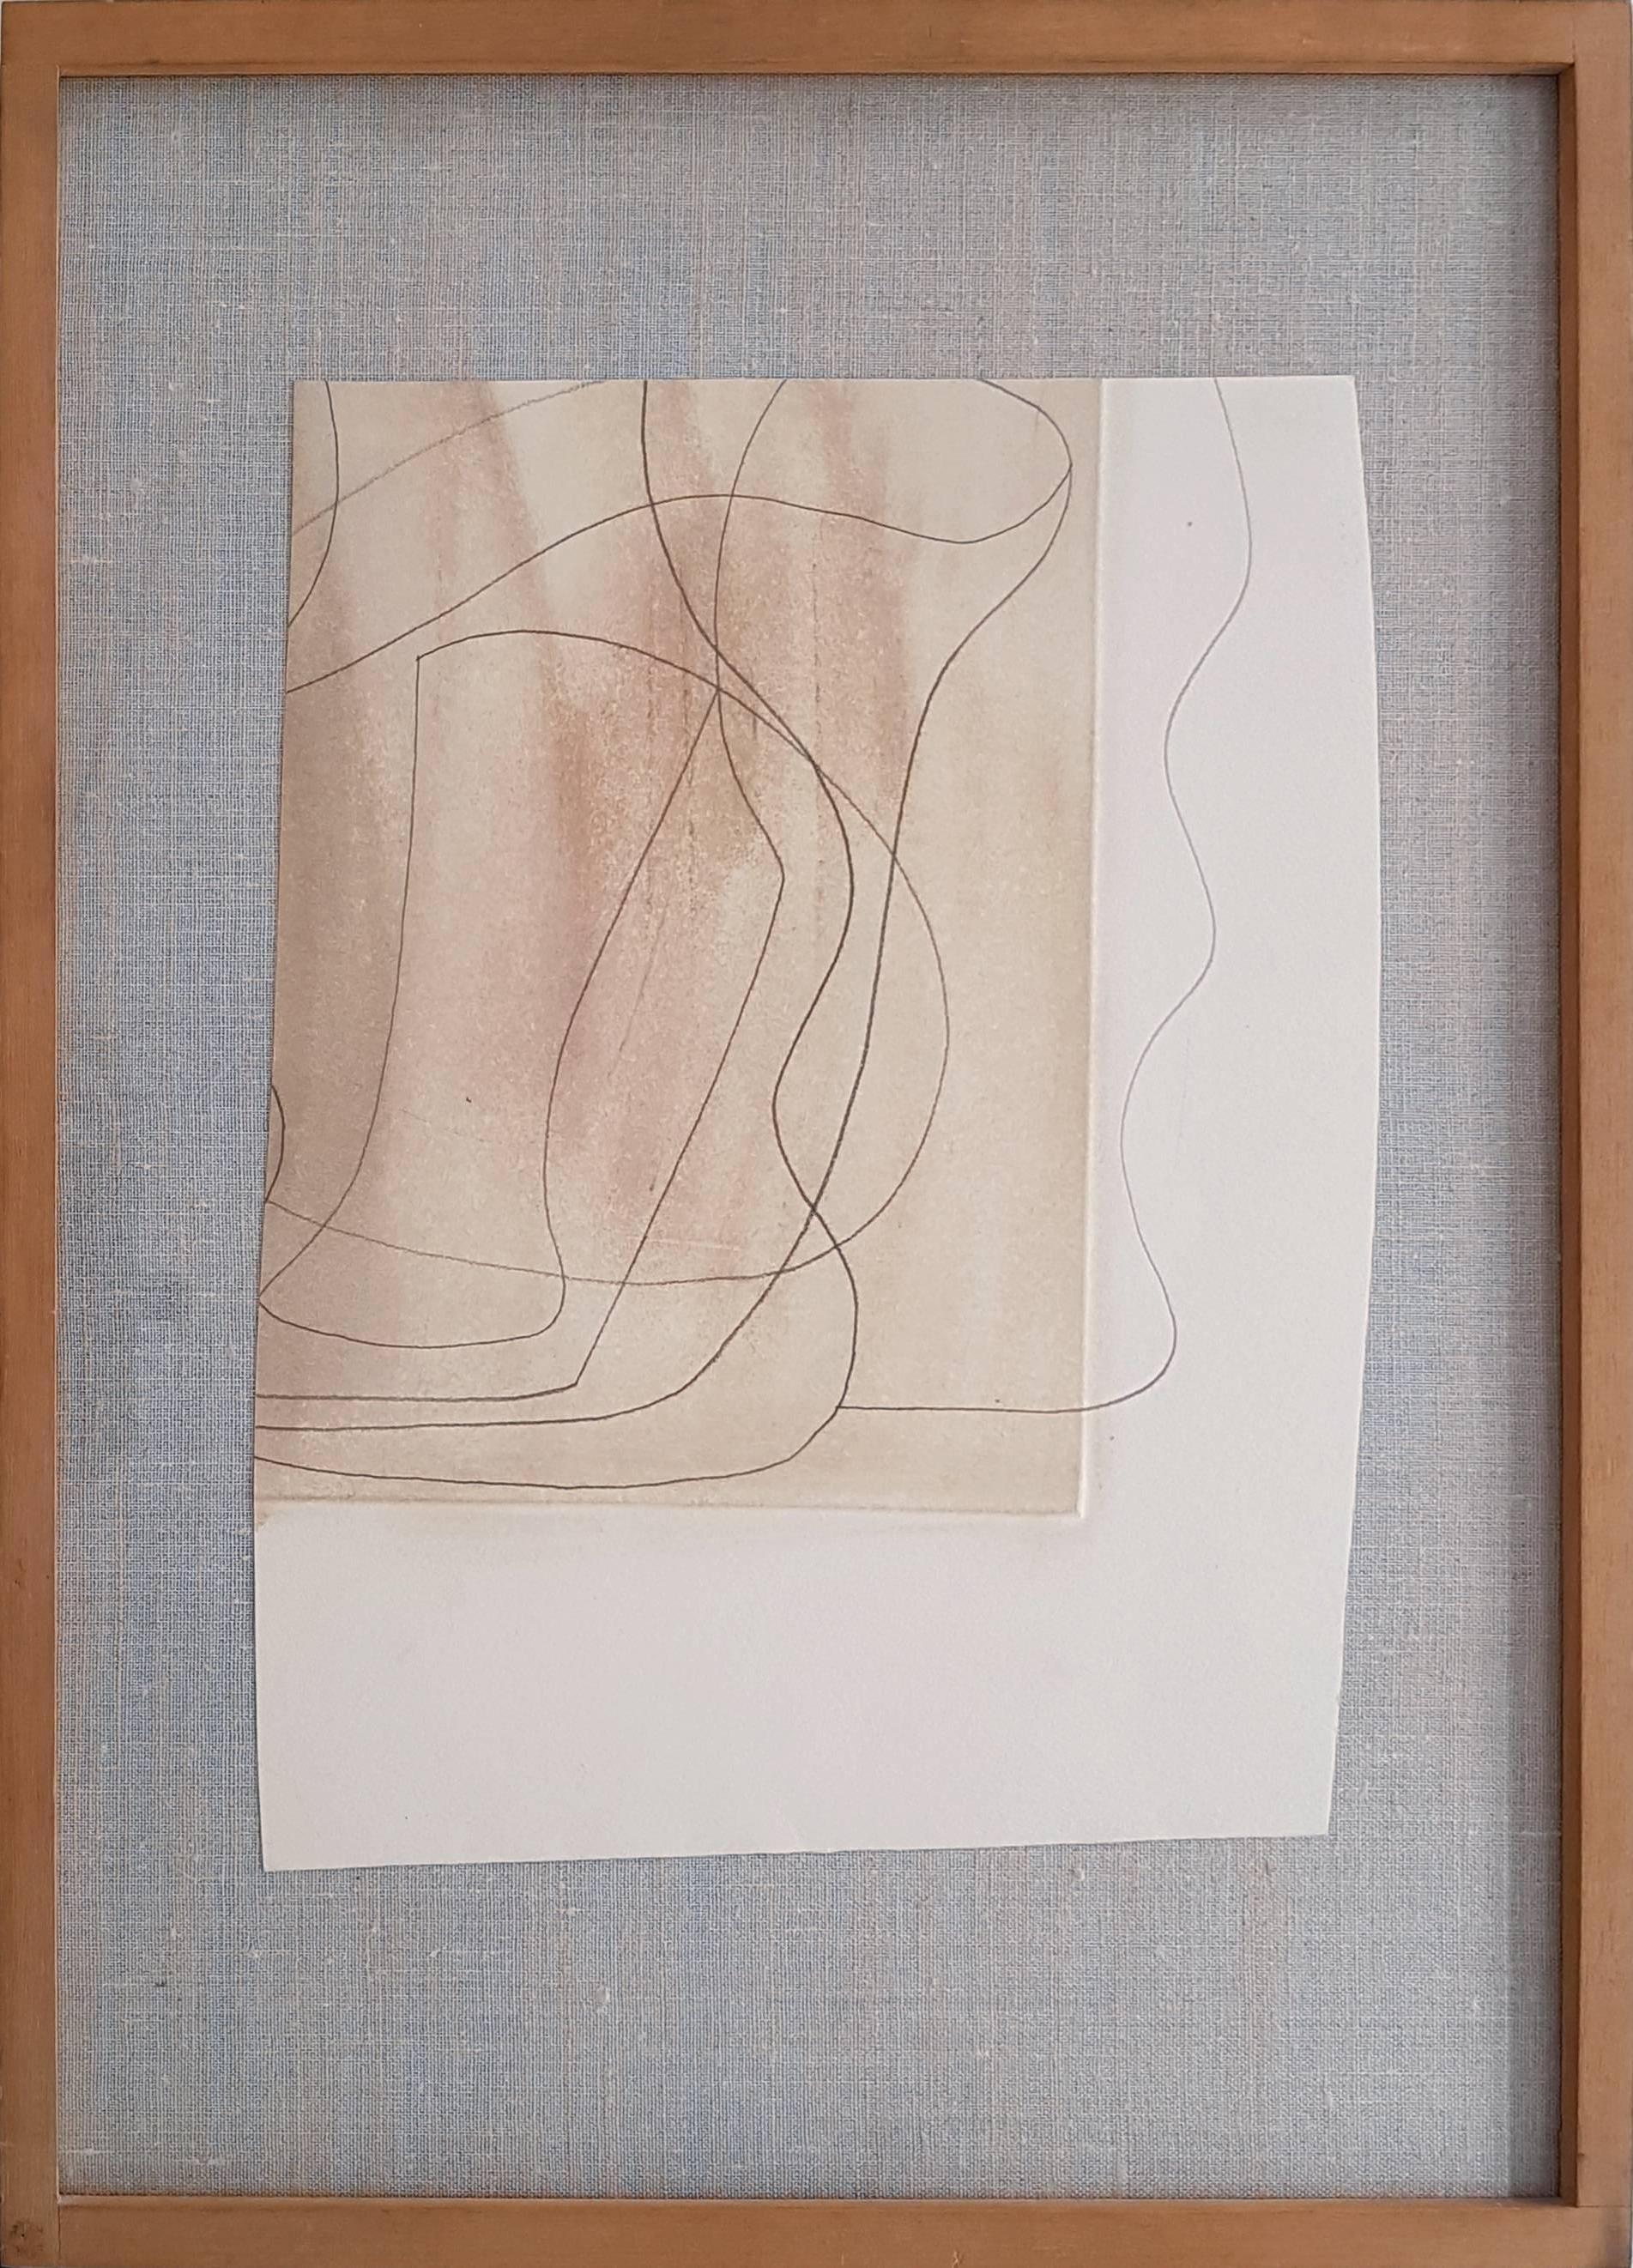 Pencil and wash on paper. Hand signed and dated overleaf.
Label on the back about the provenance: Marlborough Fine Art.
Includes frame. Dimensions: 35 x 29.2 cm Dimensions with frame: 53.5 x 5.5 x 43 cm

